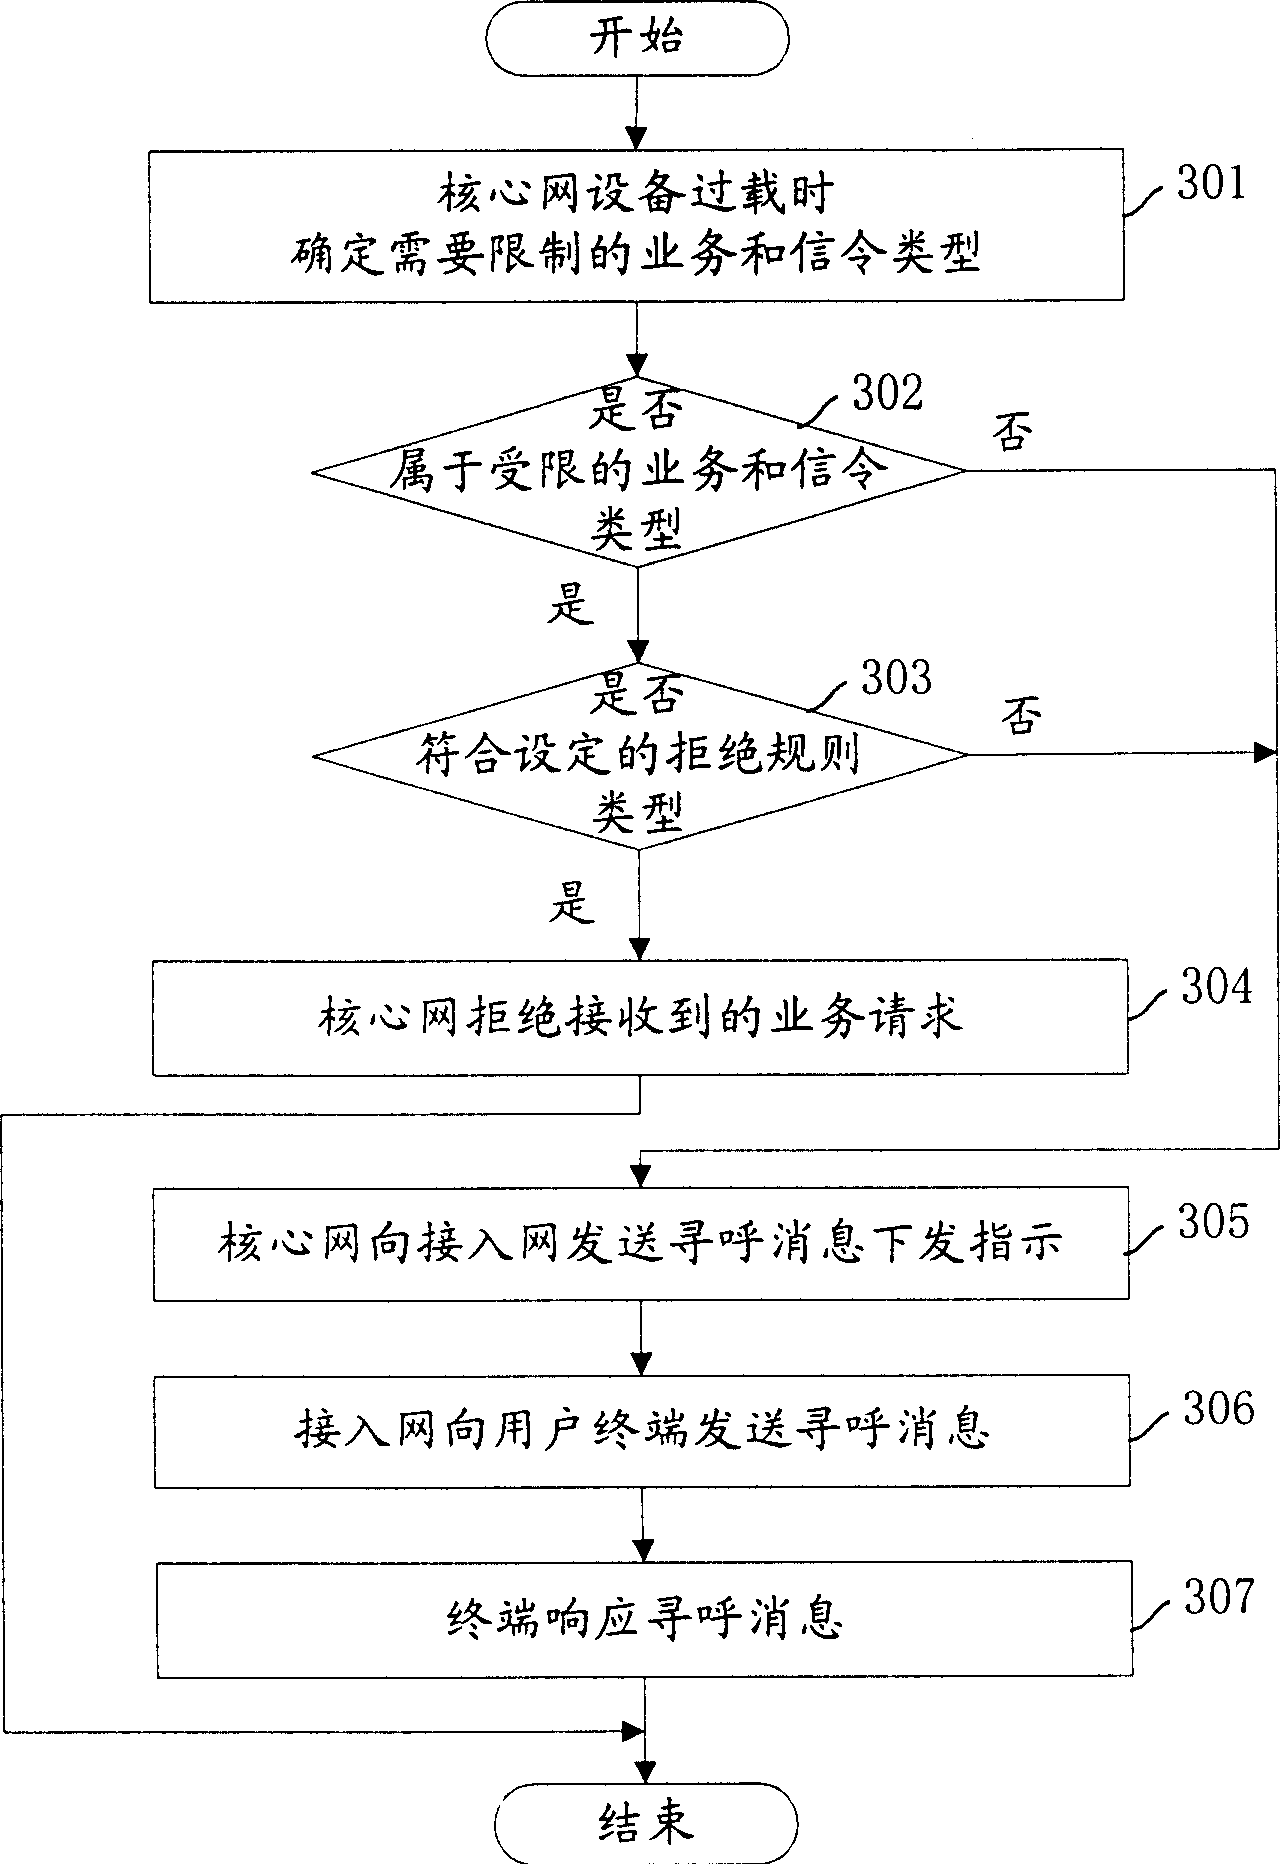 Mobile network over loading control method